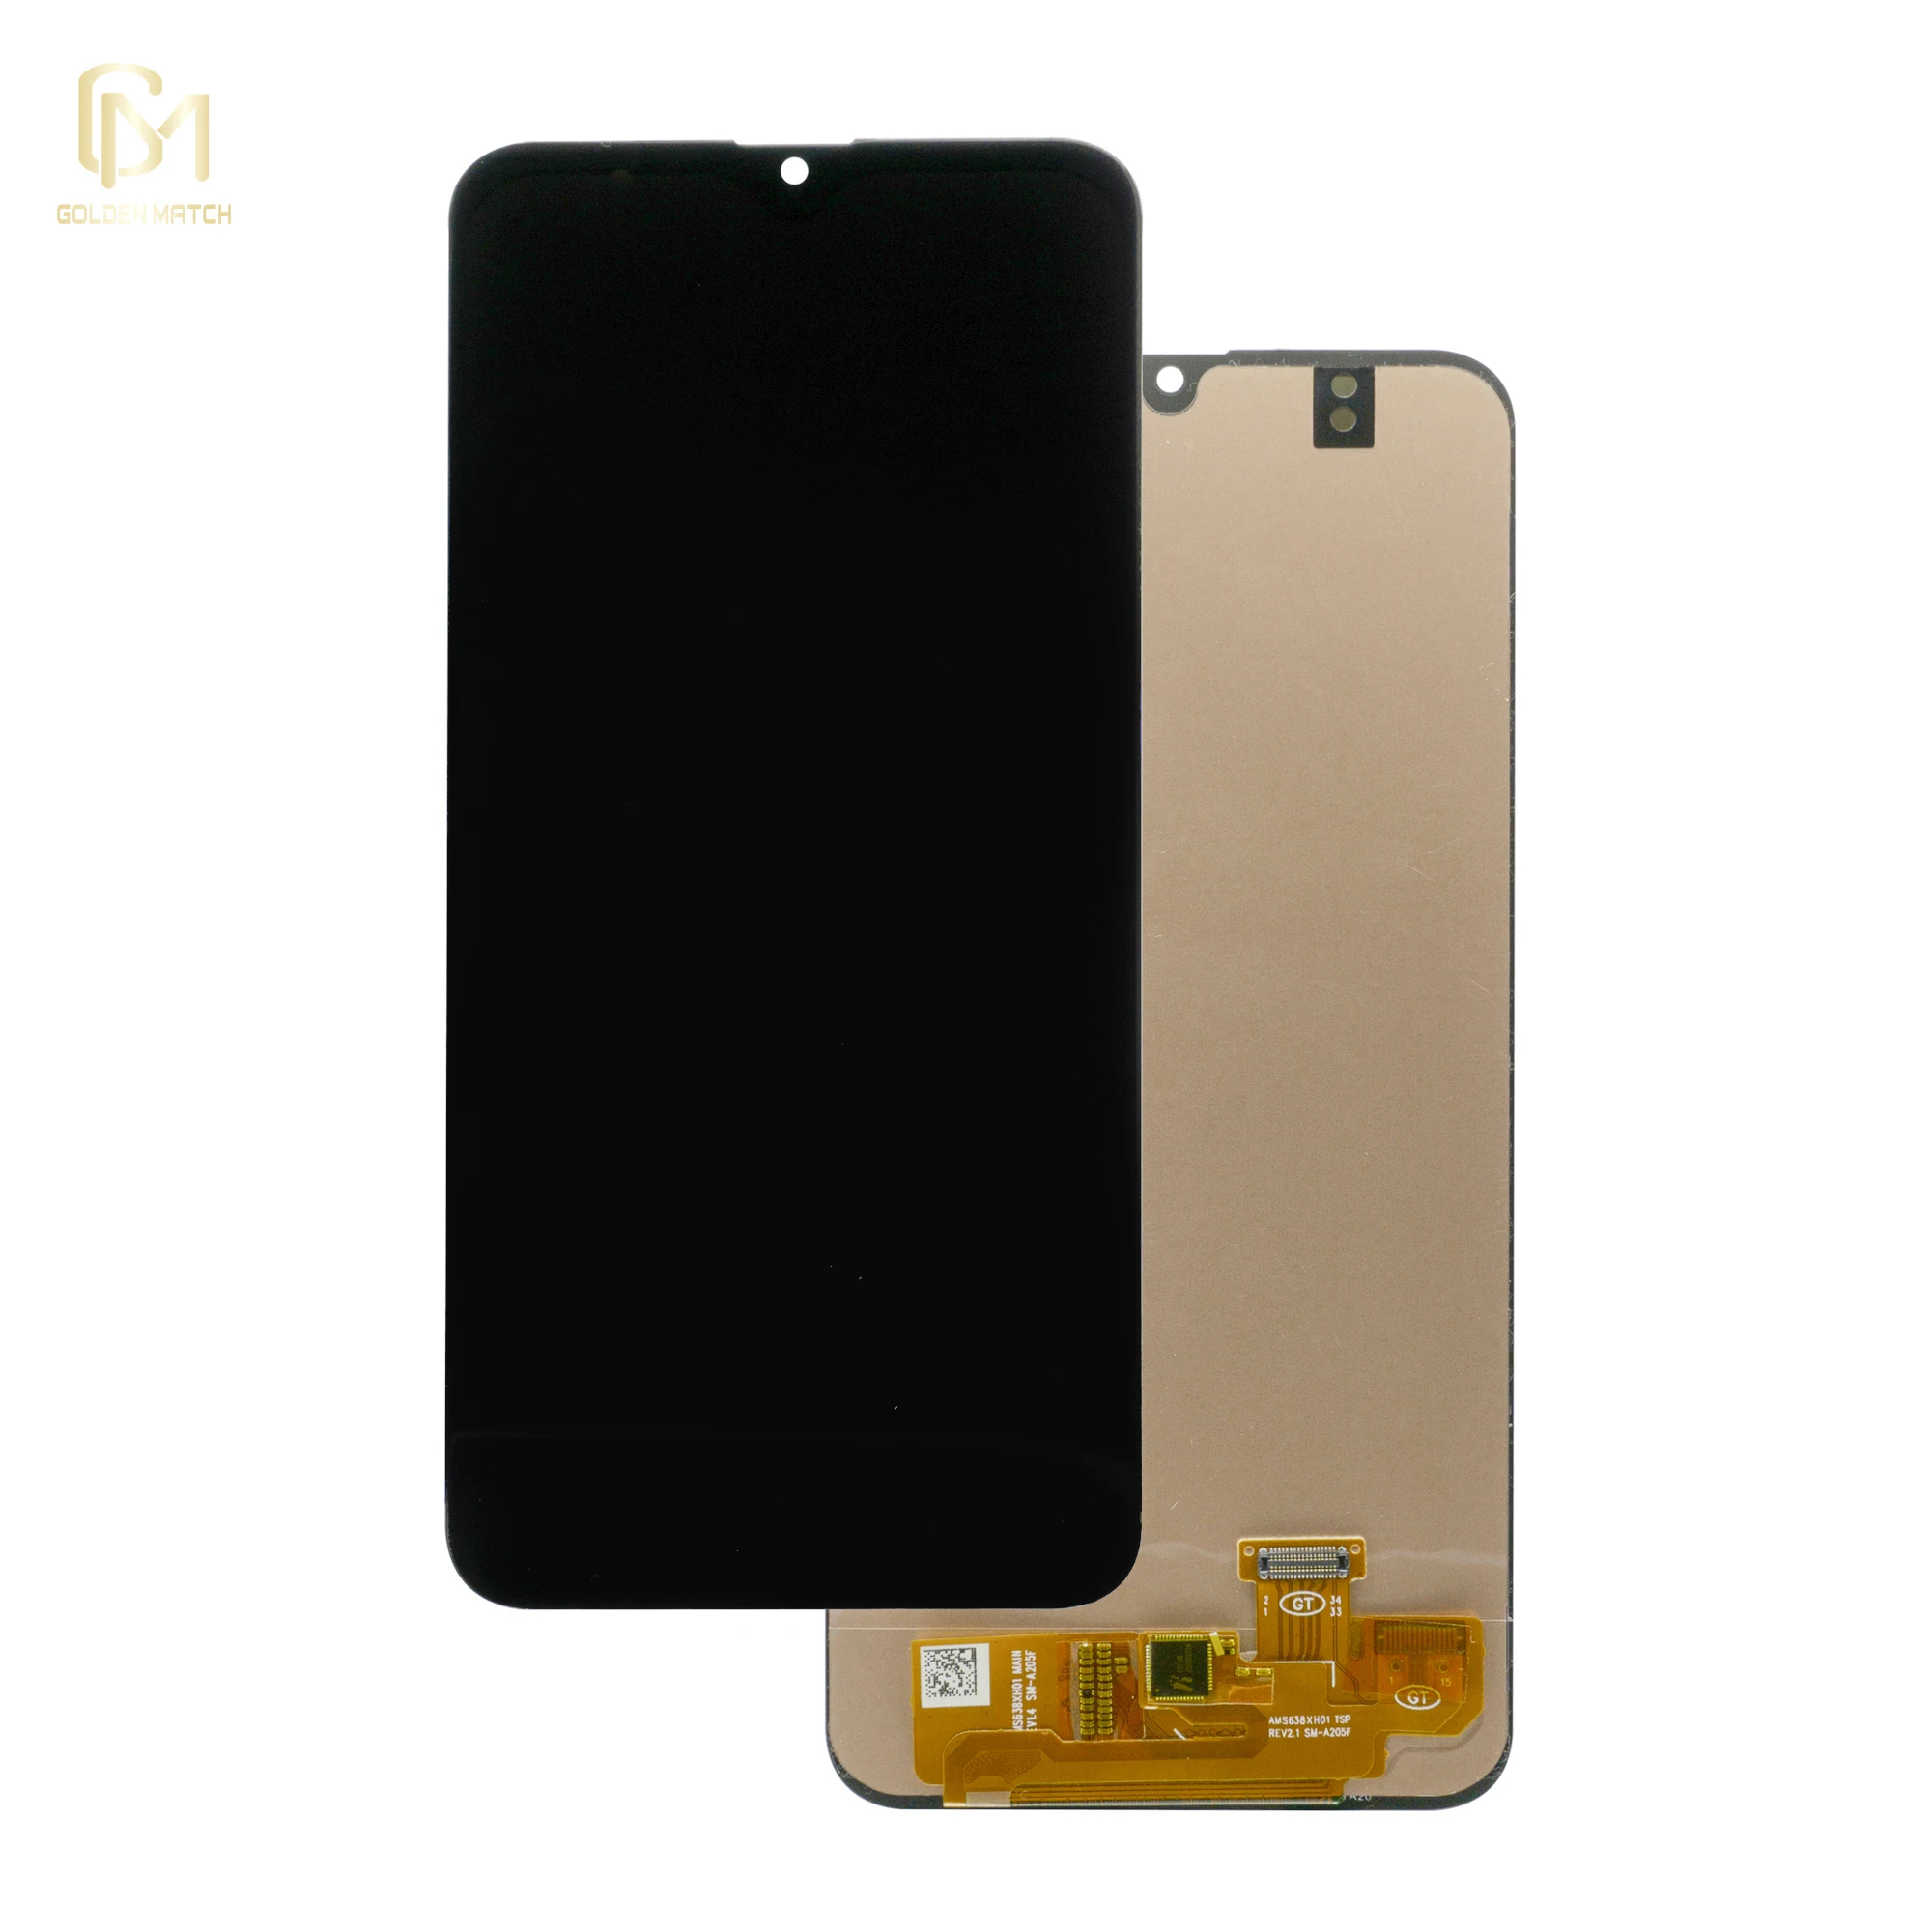 

LCD Digitizer Touch Screen Display Assembly for Samsung A10 A10S A20 A30 A50 A70 A80 A01 A11 A21 A21S A31 A51 A71 LCD, Black